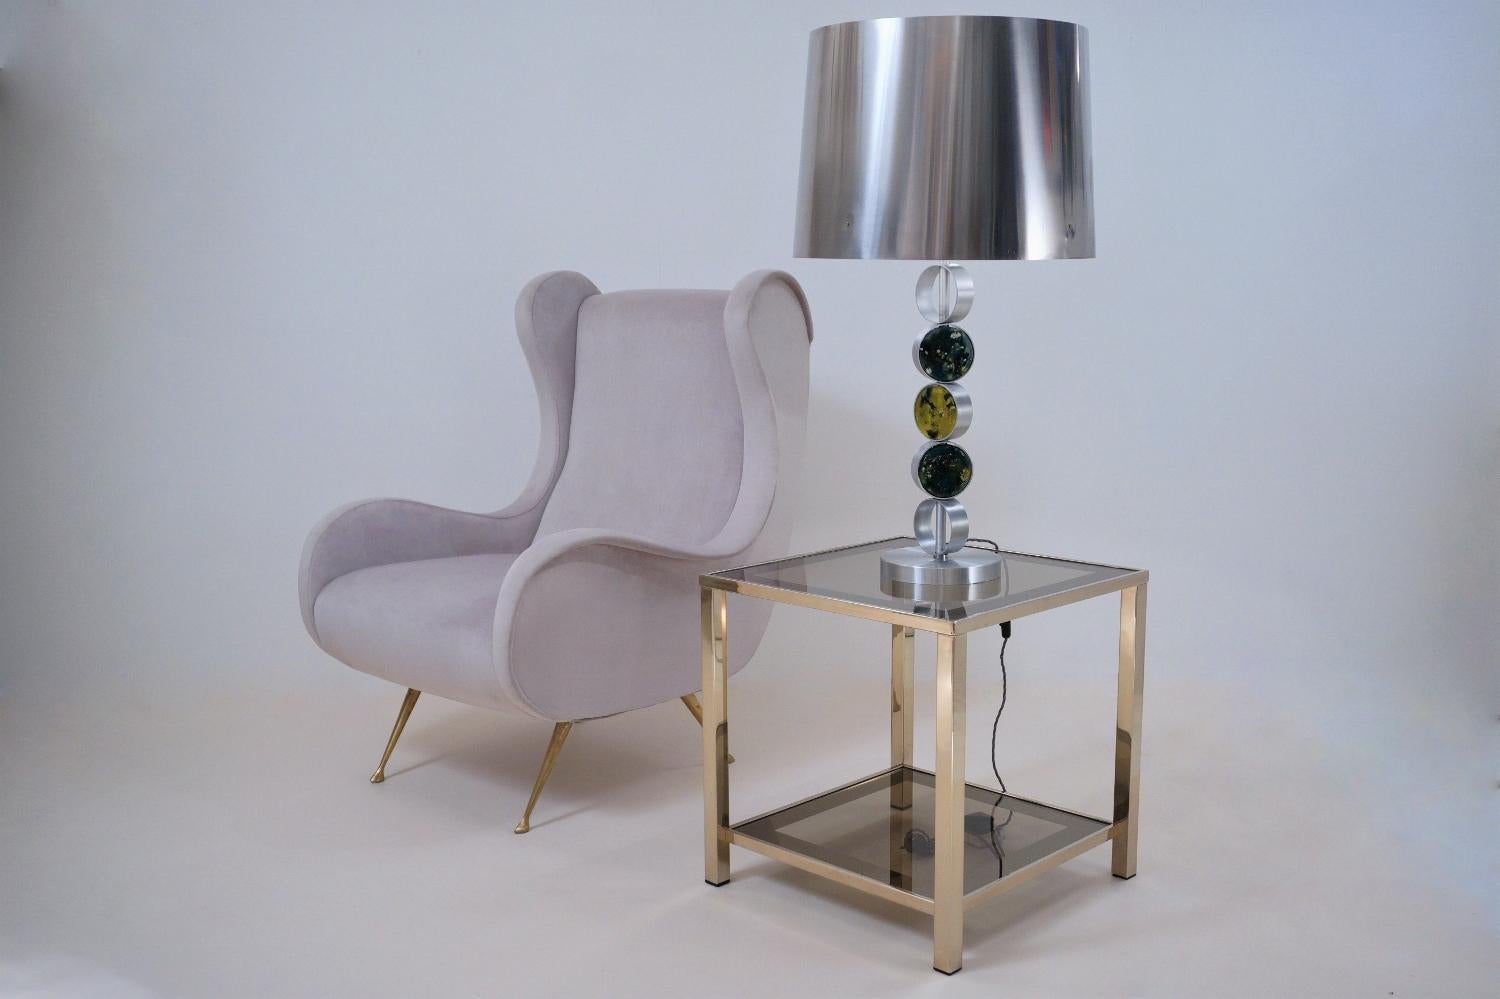 RAAK Table Lamps, Large Complementary Pair, Aluminium, Steel & Glass, 1972 Dutch In Good Condition For Sale In London, GB